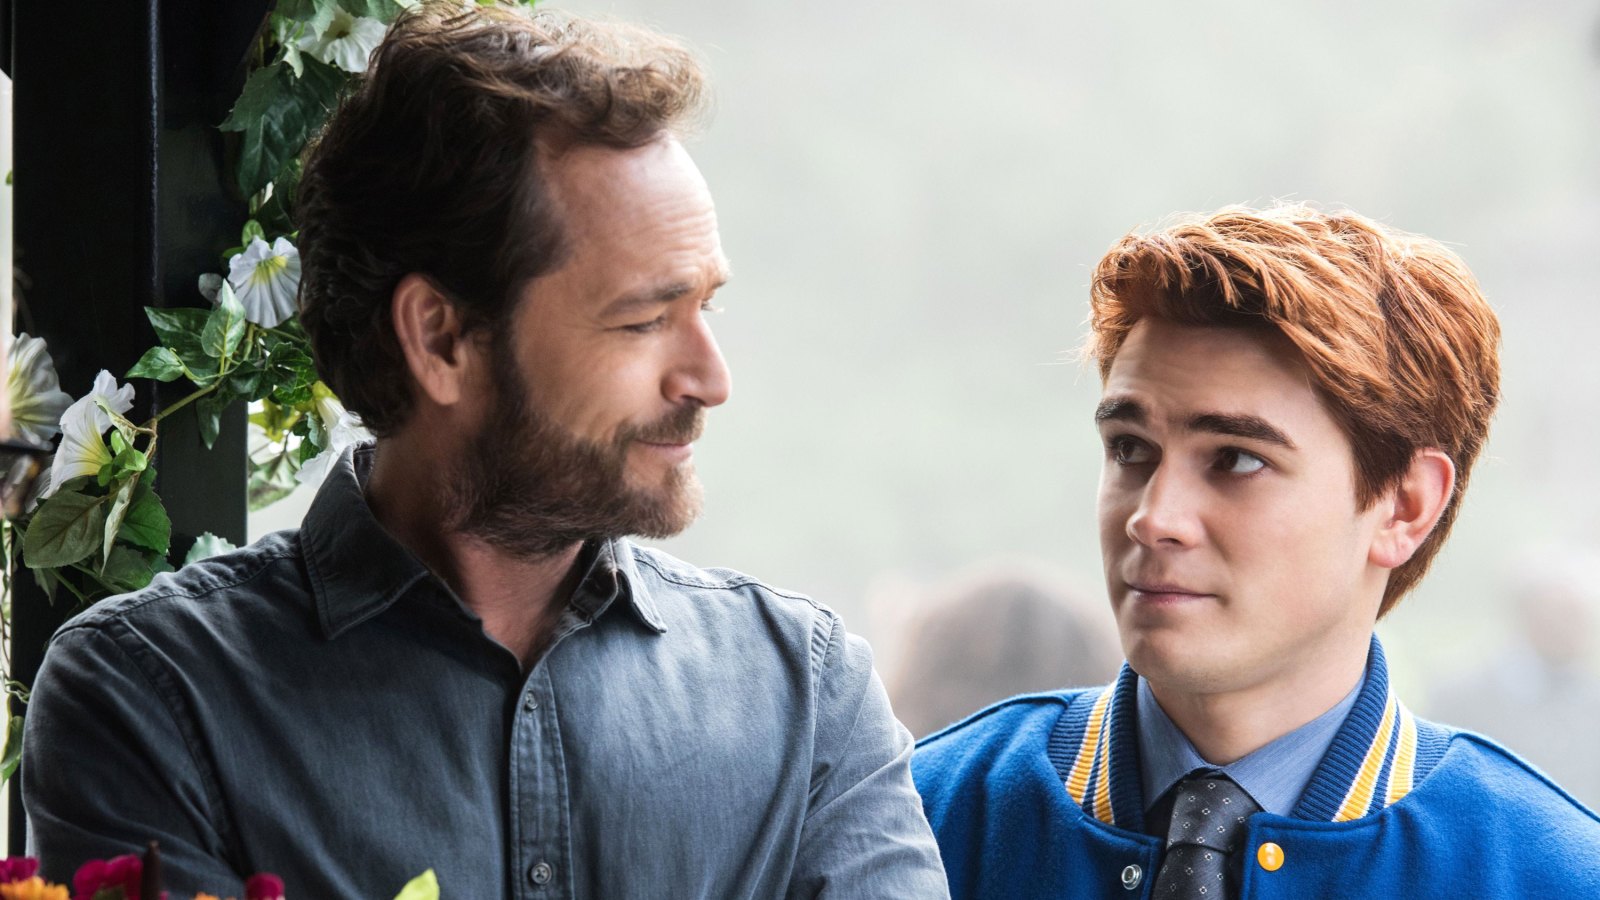 See How the ‘Riverdale’ Cast Honored Luke Perry in the Season 4 Premiere